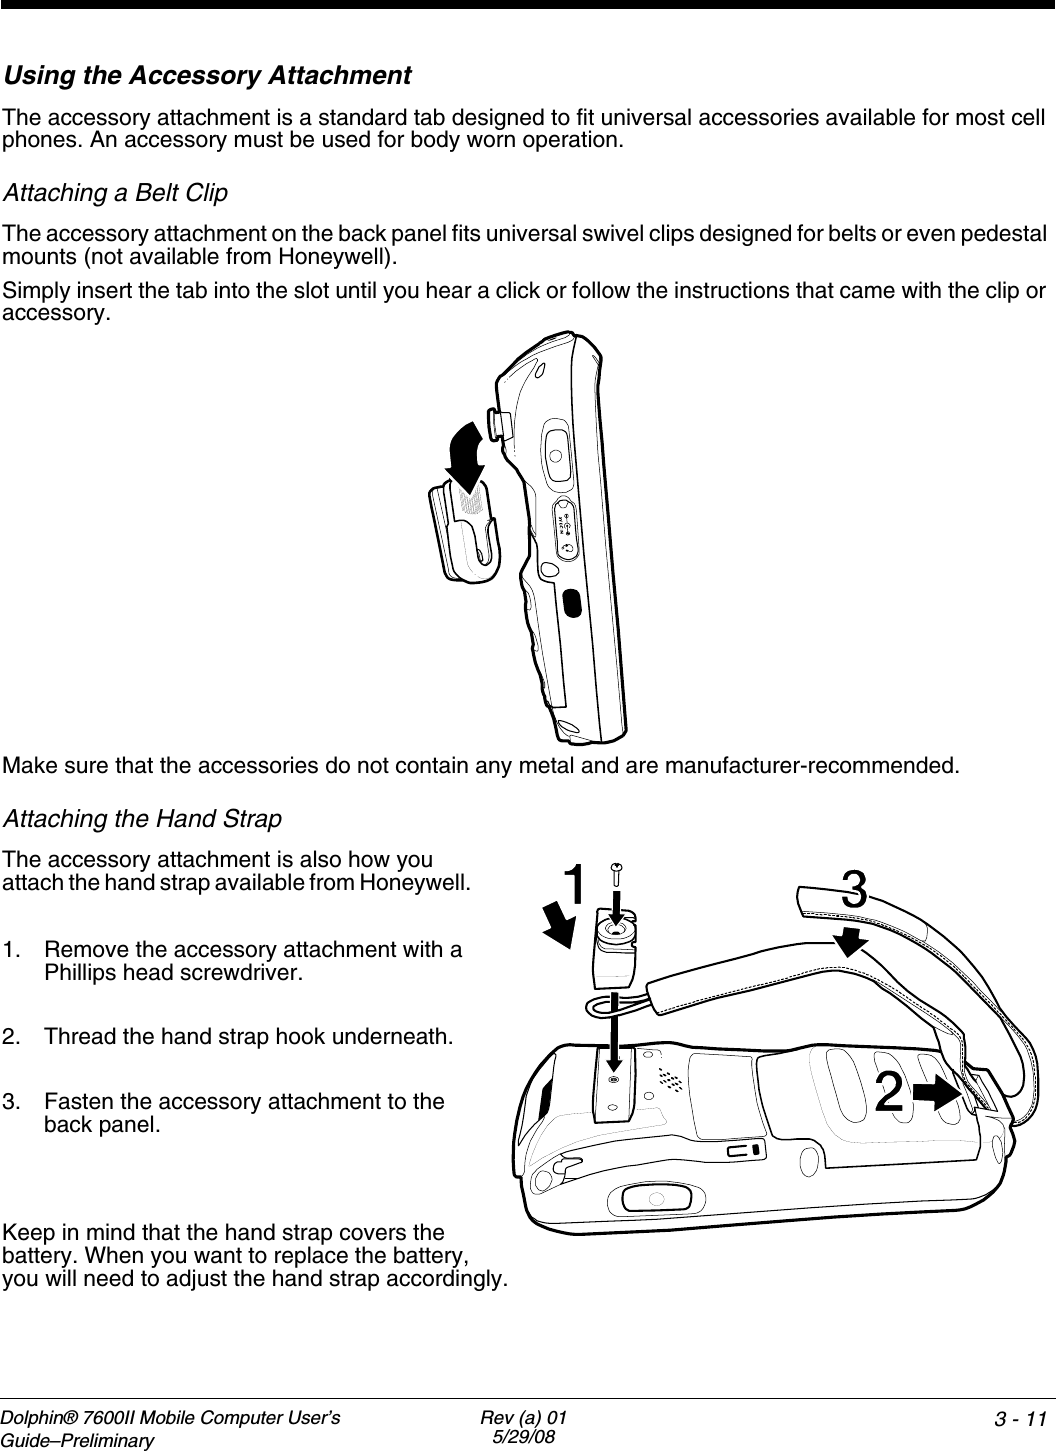 Dolphin® 7600II Mobile Computer User’s Guide–PreliminaryRev (a) 015/29/08 3 - 11Using the Accessory AttachmentThe accessory attachment is a standard tab designed to fit universal accessories available for most cell phones. An accessory must be used for body worn operation.Attaching a Belt ClipThe accessory attachment on the back panel fits universal swivel clips designed for belts or even pedestal mounts (not available from Honeywell). Simply insert the tab into the slot until you hear a click or follow the instructions that came with the clip or accessory.Make sure that the accessories do not contain any metal and are manufacturer-recommended.Attaching the Hand StrapThe accessory attachment is also how you attach the hand strap available from Honeywell. 1. Remove the accessory attachment with a Phillips head screwdriver. 2. Thread the hand strap hook underneath.3. Fasten the accessory attachment to the back panel.Keep in mind that the hand strap covers the battery. When you want to replace the battery, you will need to adjust the hand strap accordingly.